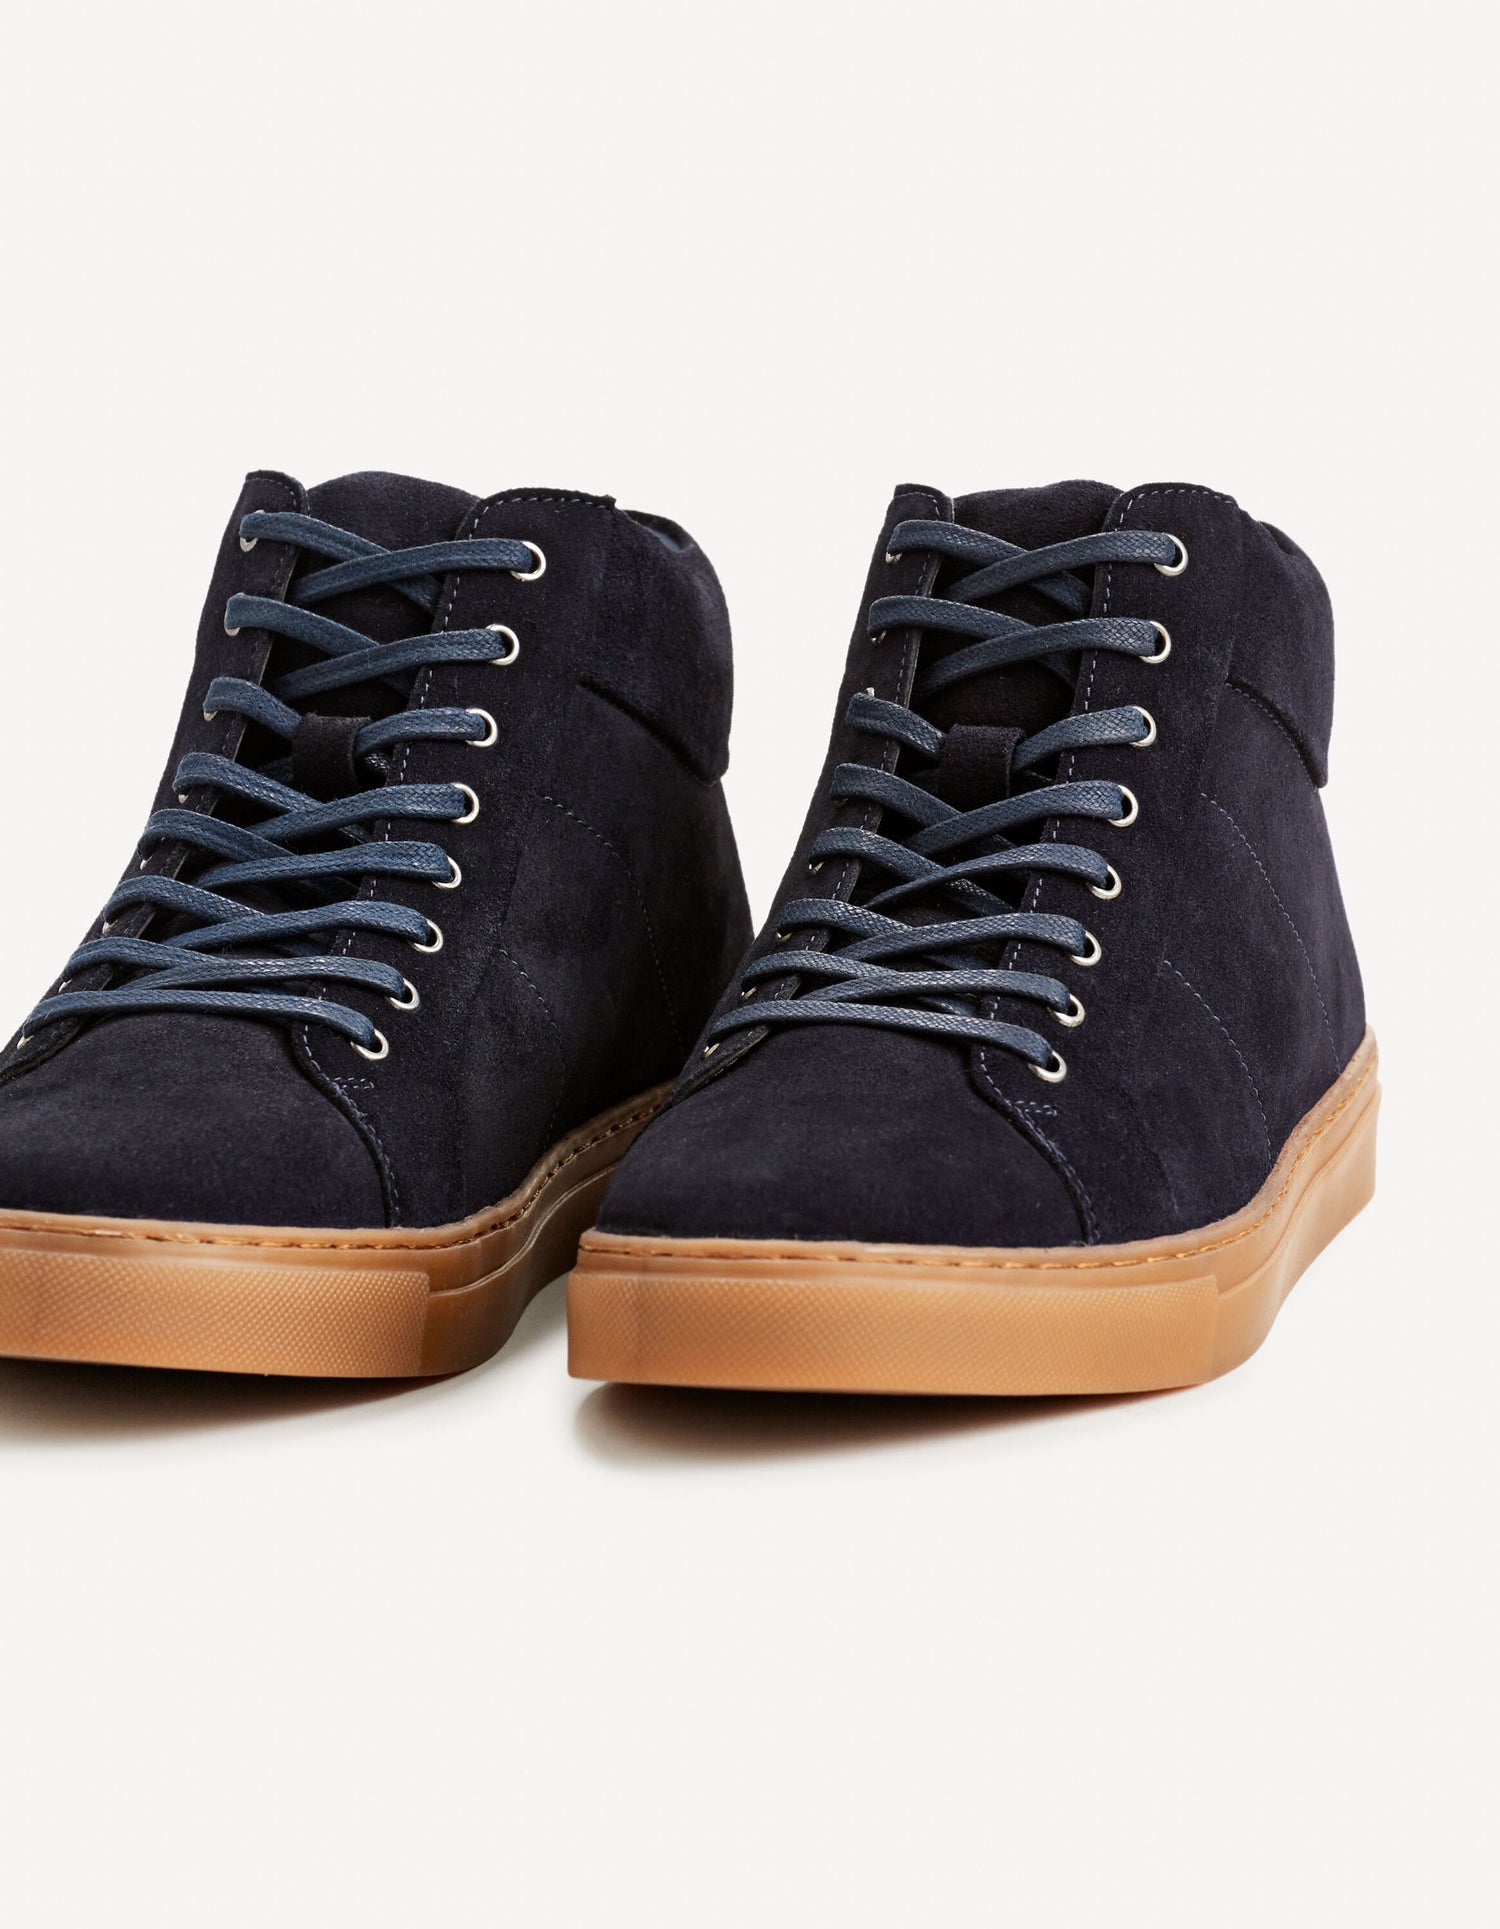 High-Top Leather Shoes - Navy Blue_FYSKATER_NAVY_04